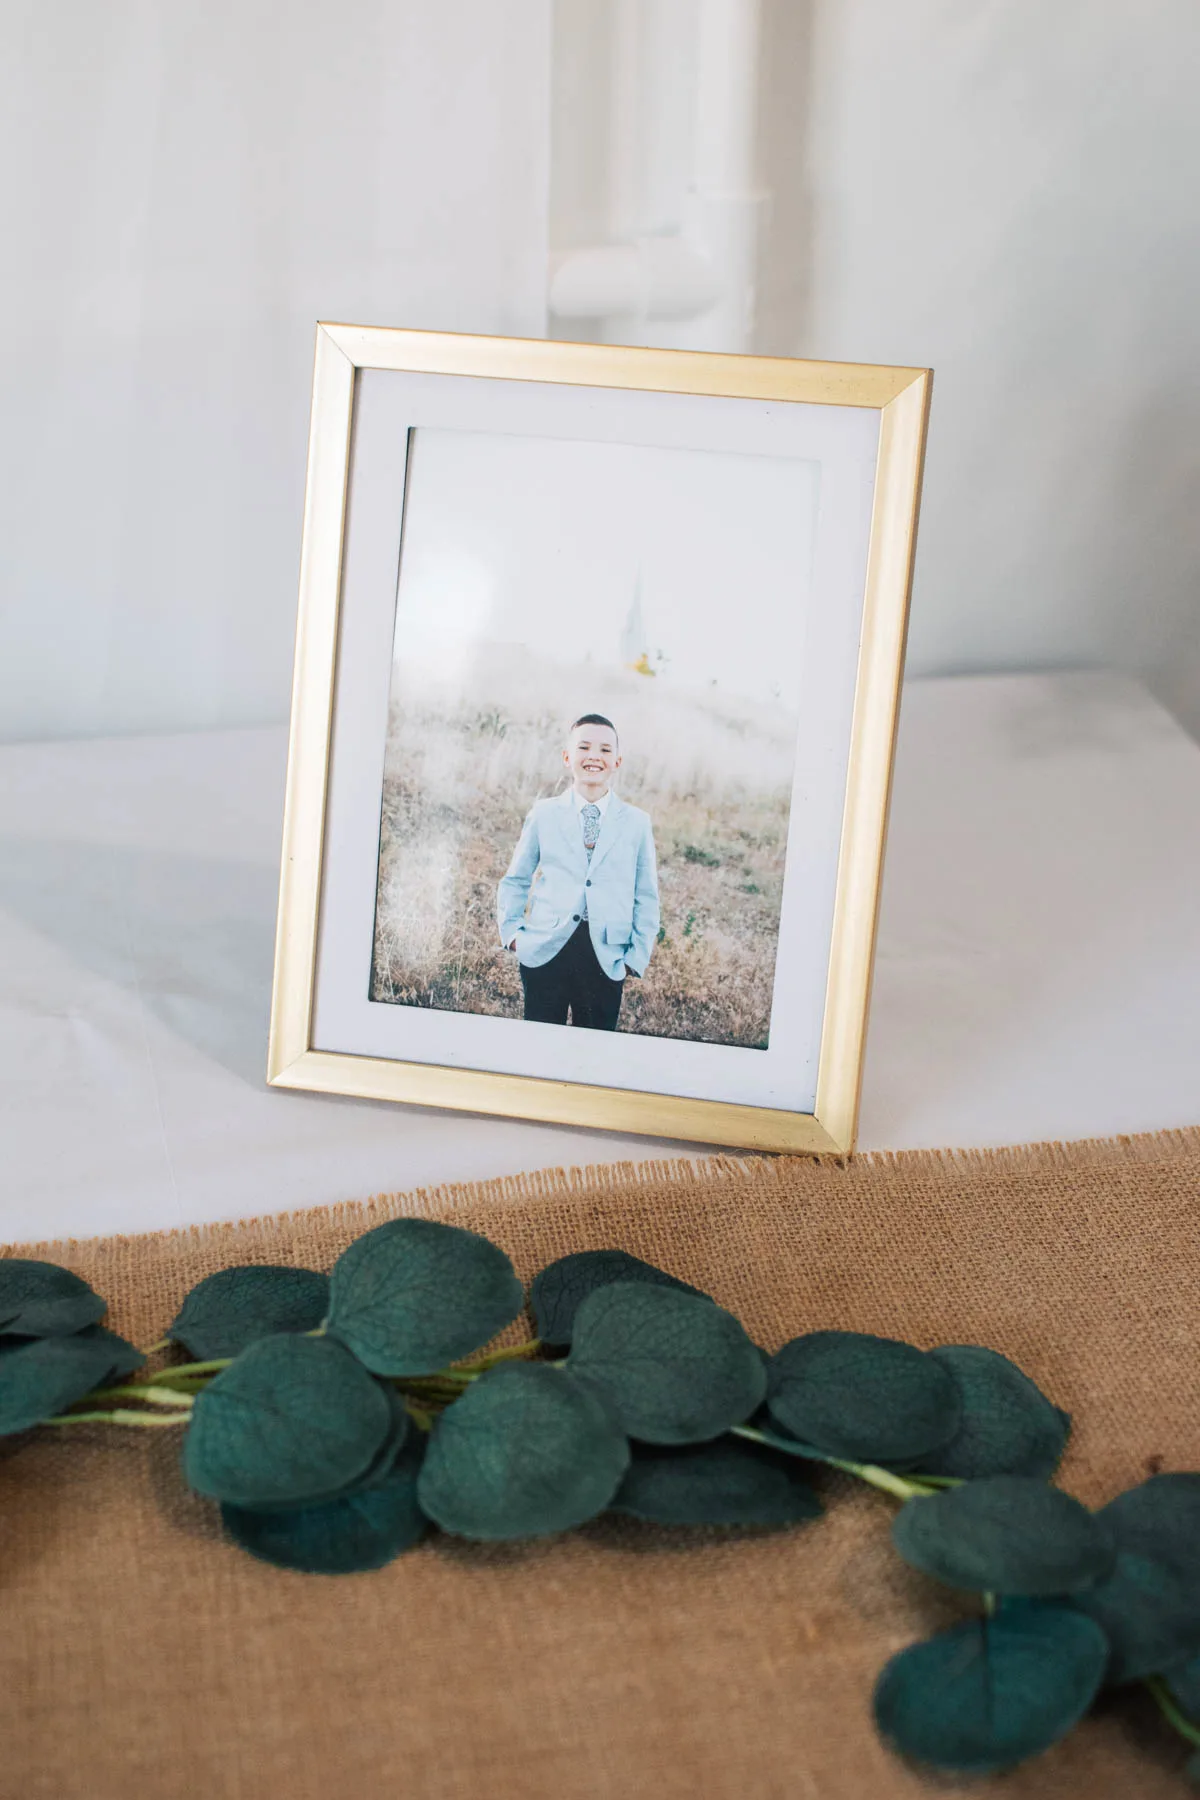 Boy's baptism picture in gold frame on table with garland and runner.